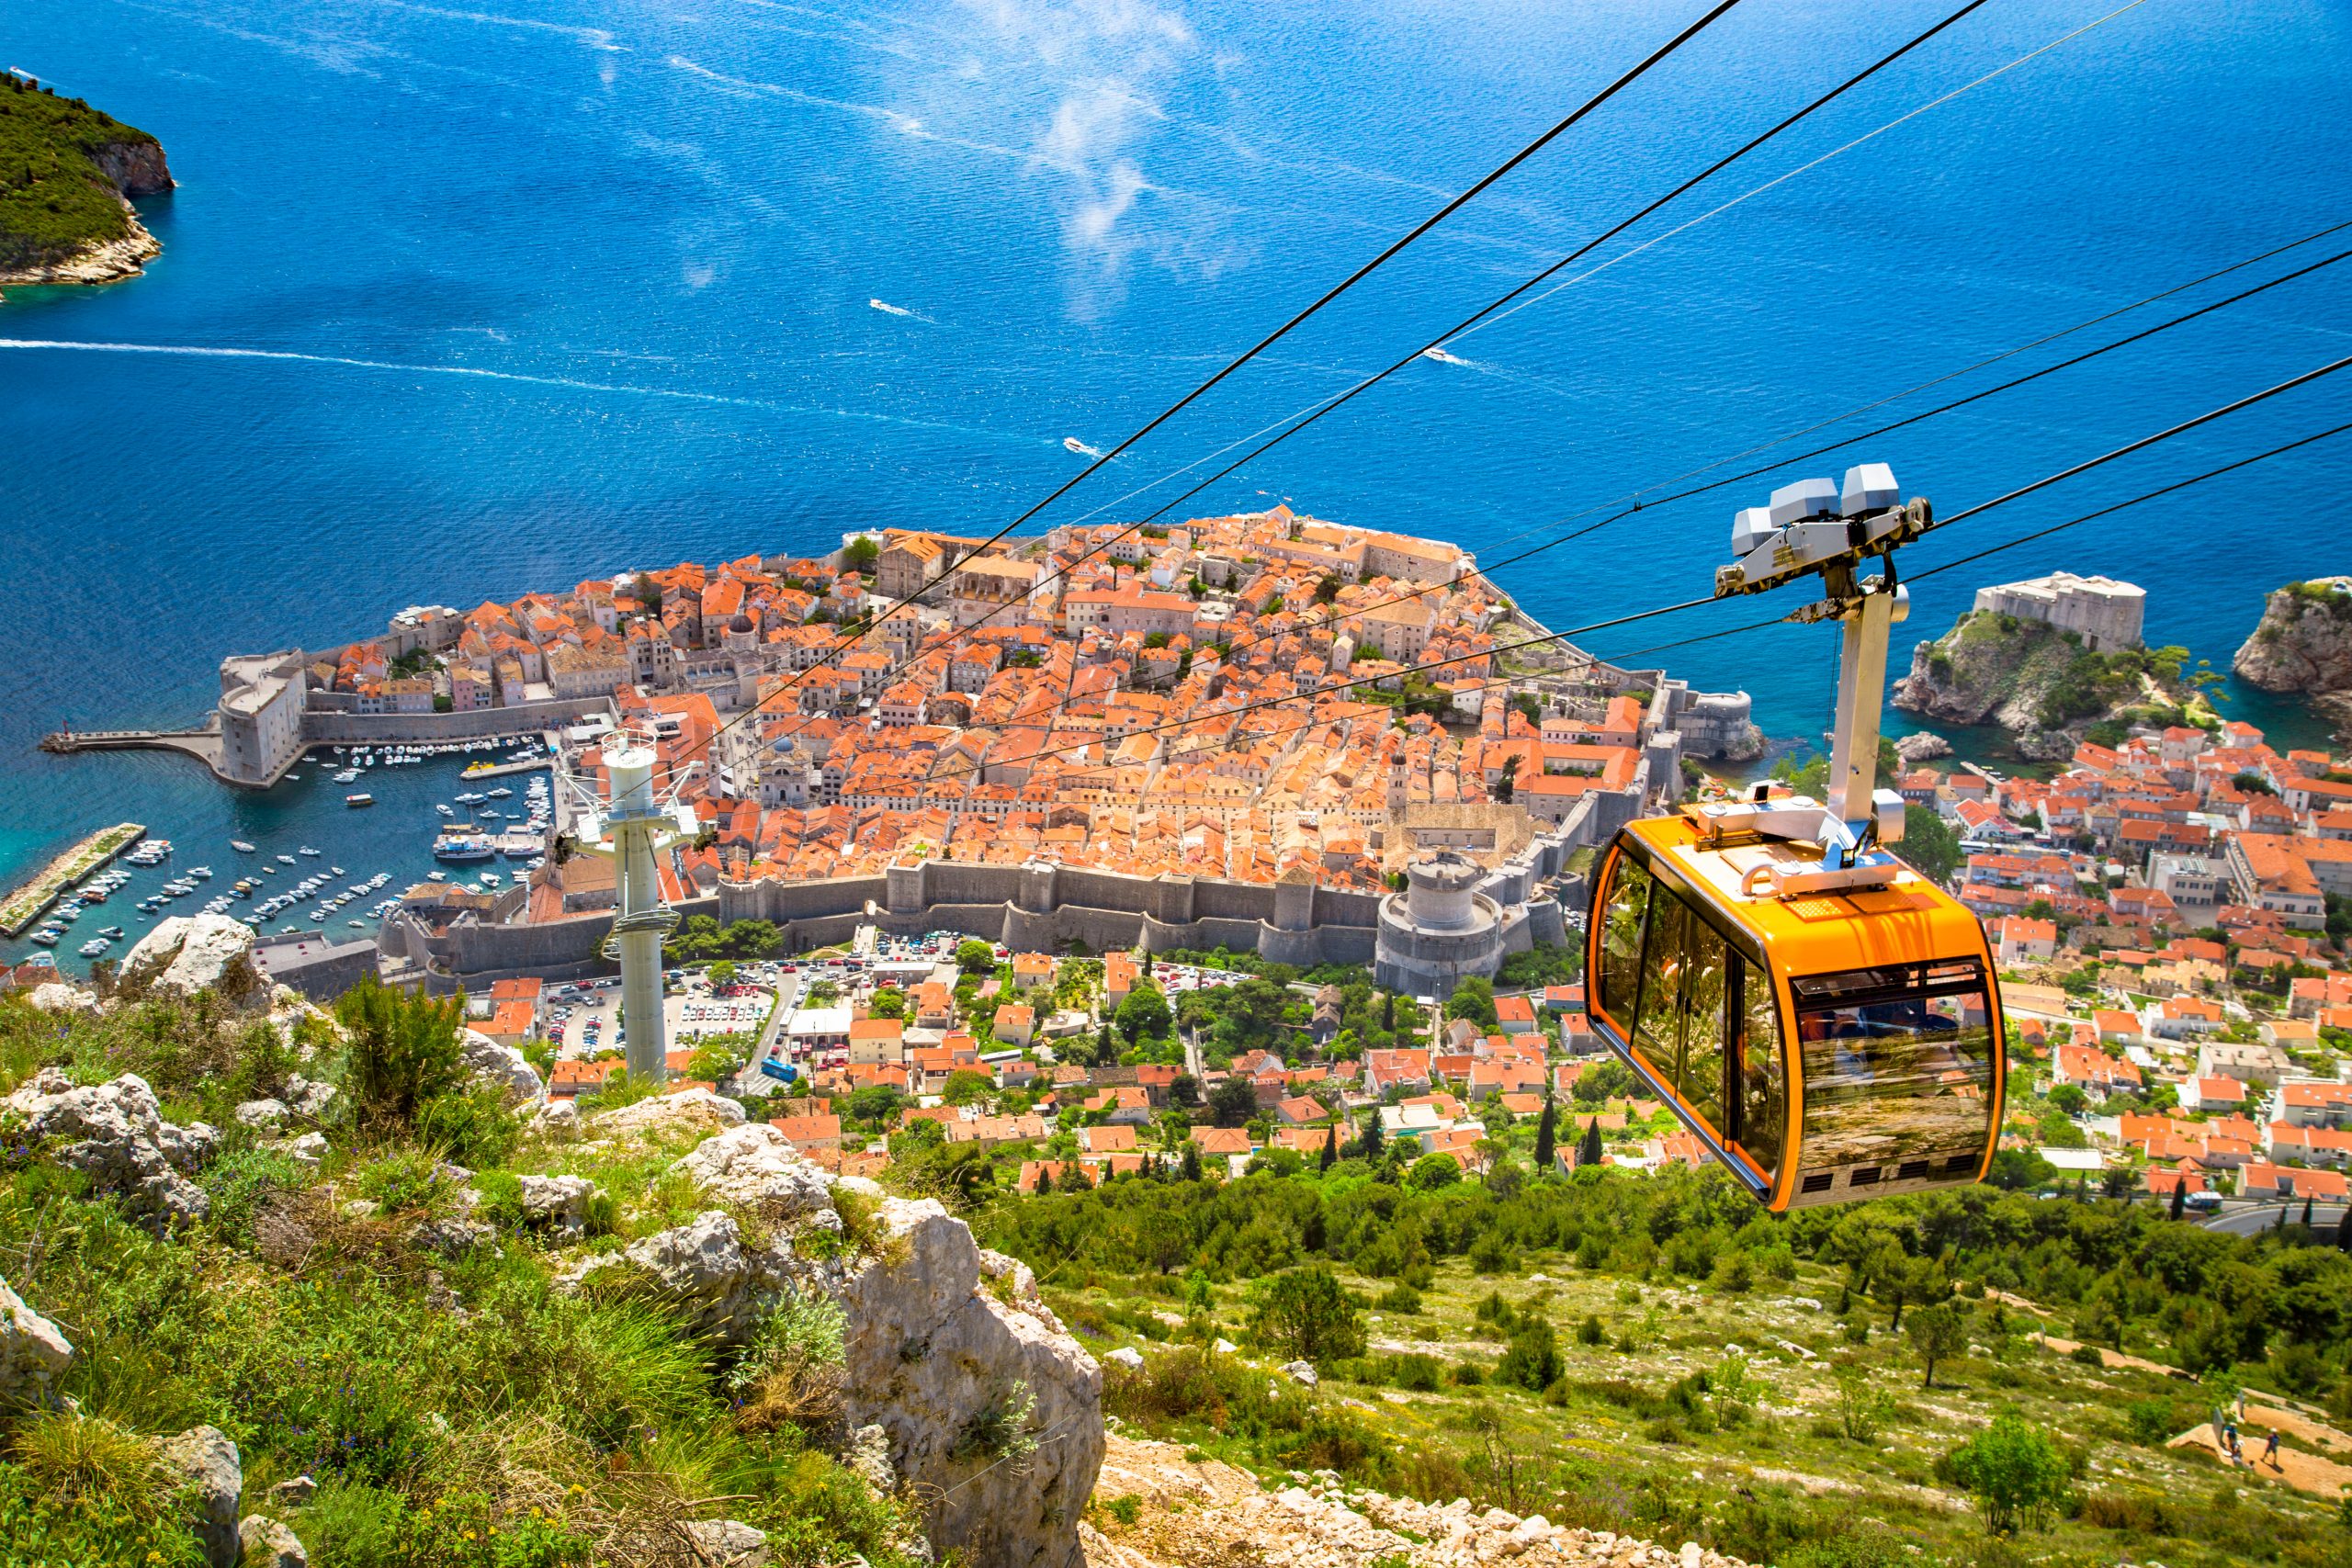 Enjoy The Cable Car Ride And The Bueatiful Panoramic View Over Dubrovnik On Your Day Tour From Split